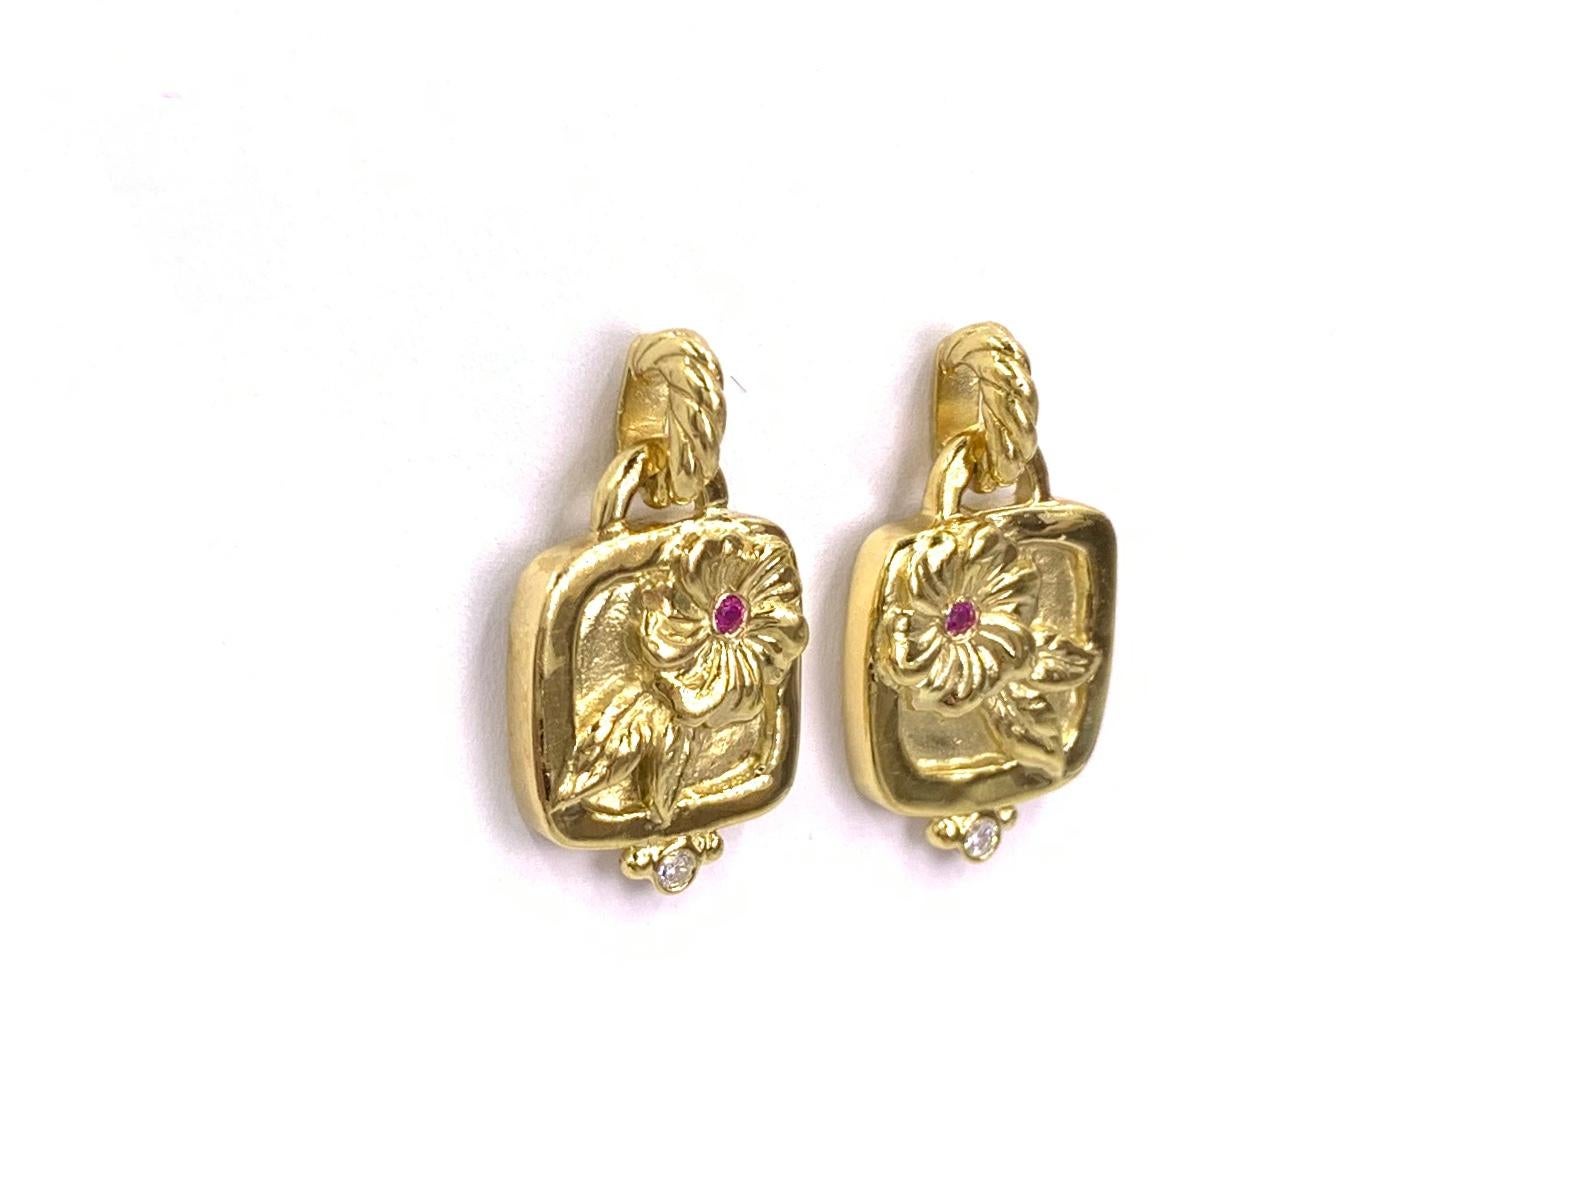 Well crafted in 18 karat yellow gold by fine goldsmith designer, SeidenGang. These drop earrings feature carved hibiscus flowers with round pink sapphire centers and a single bezel set diamond at the bottom of each. Diamond carat total weight is .05